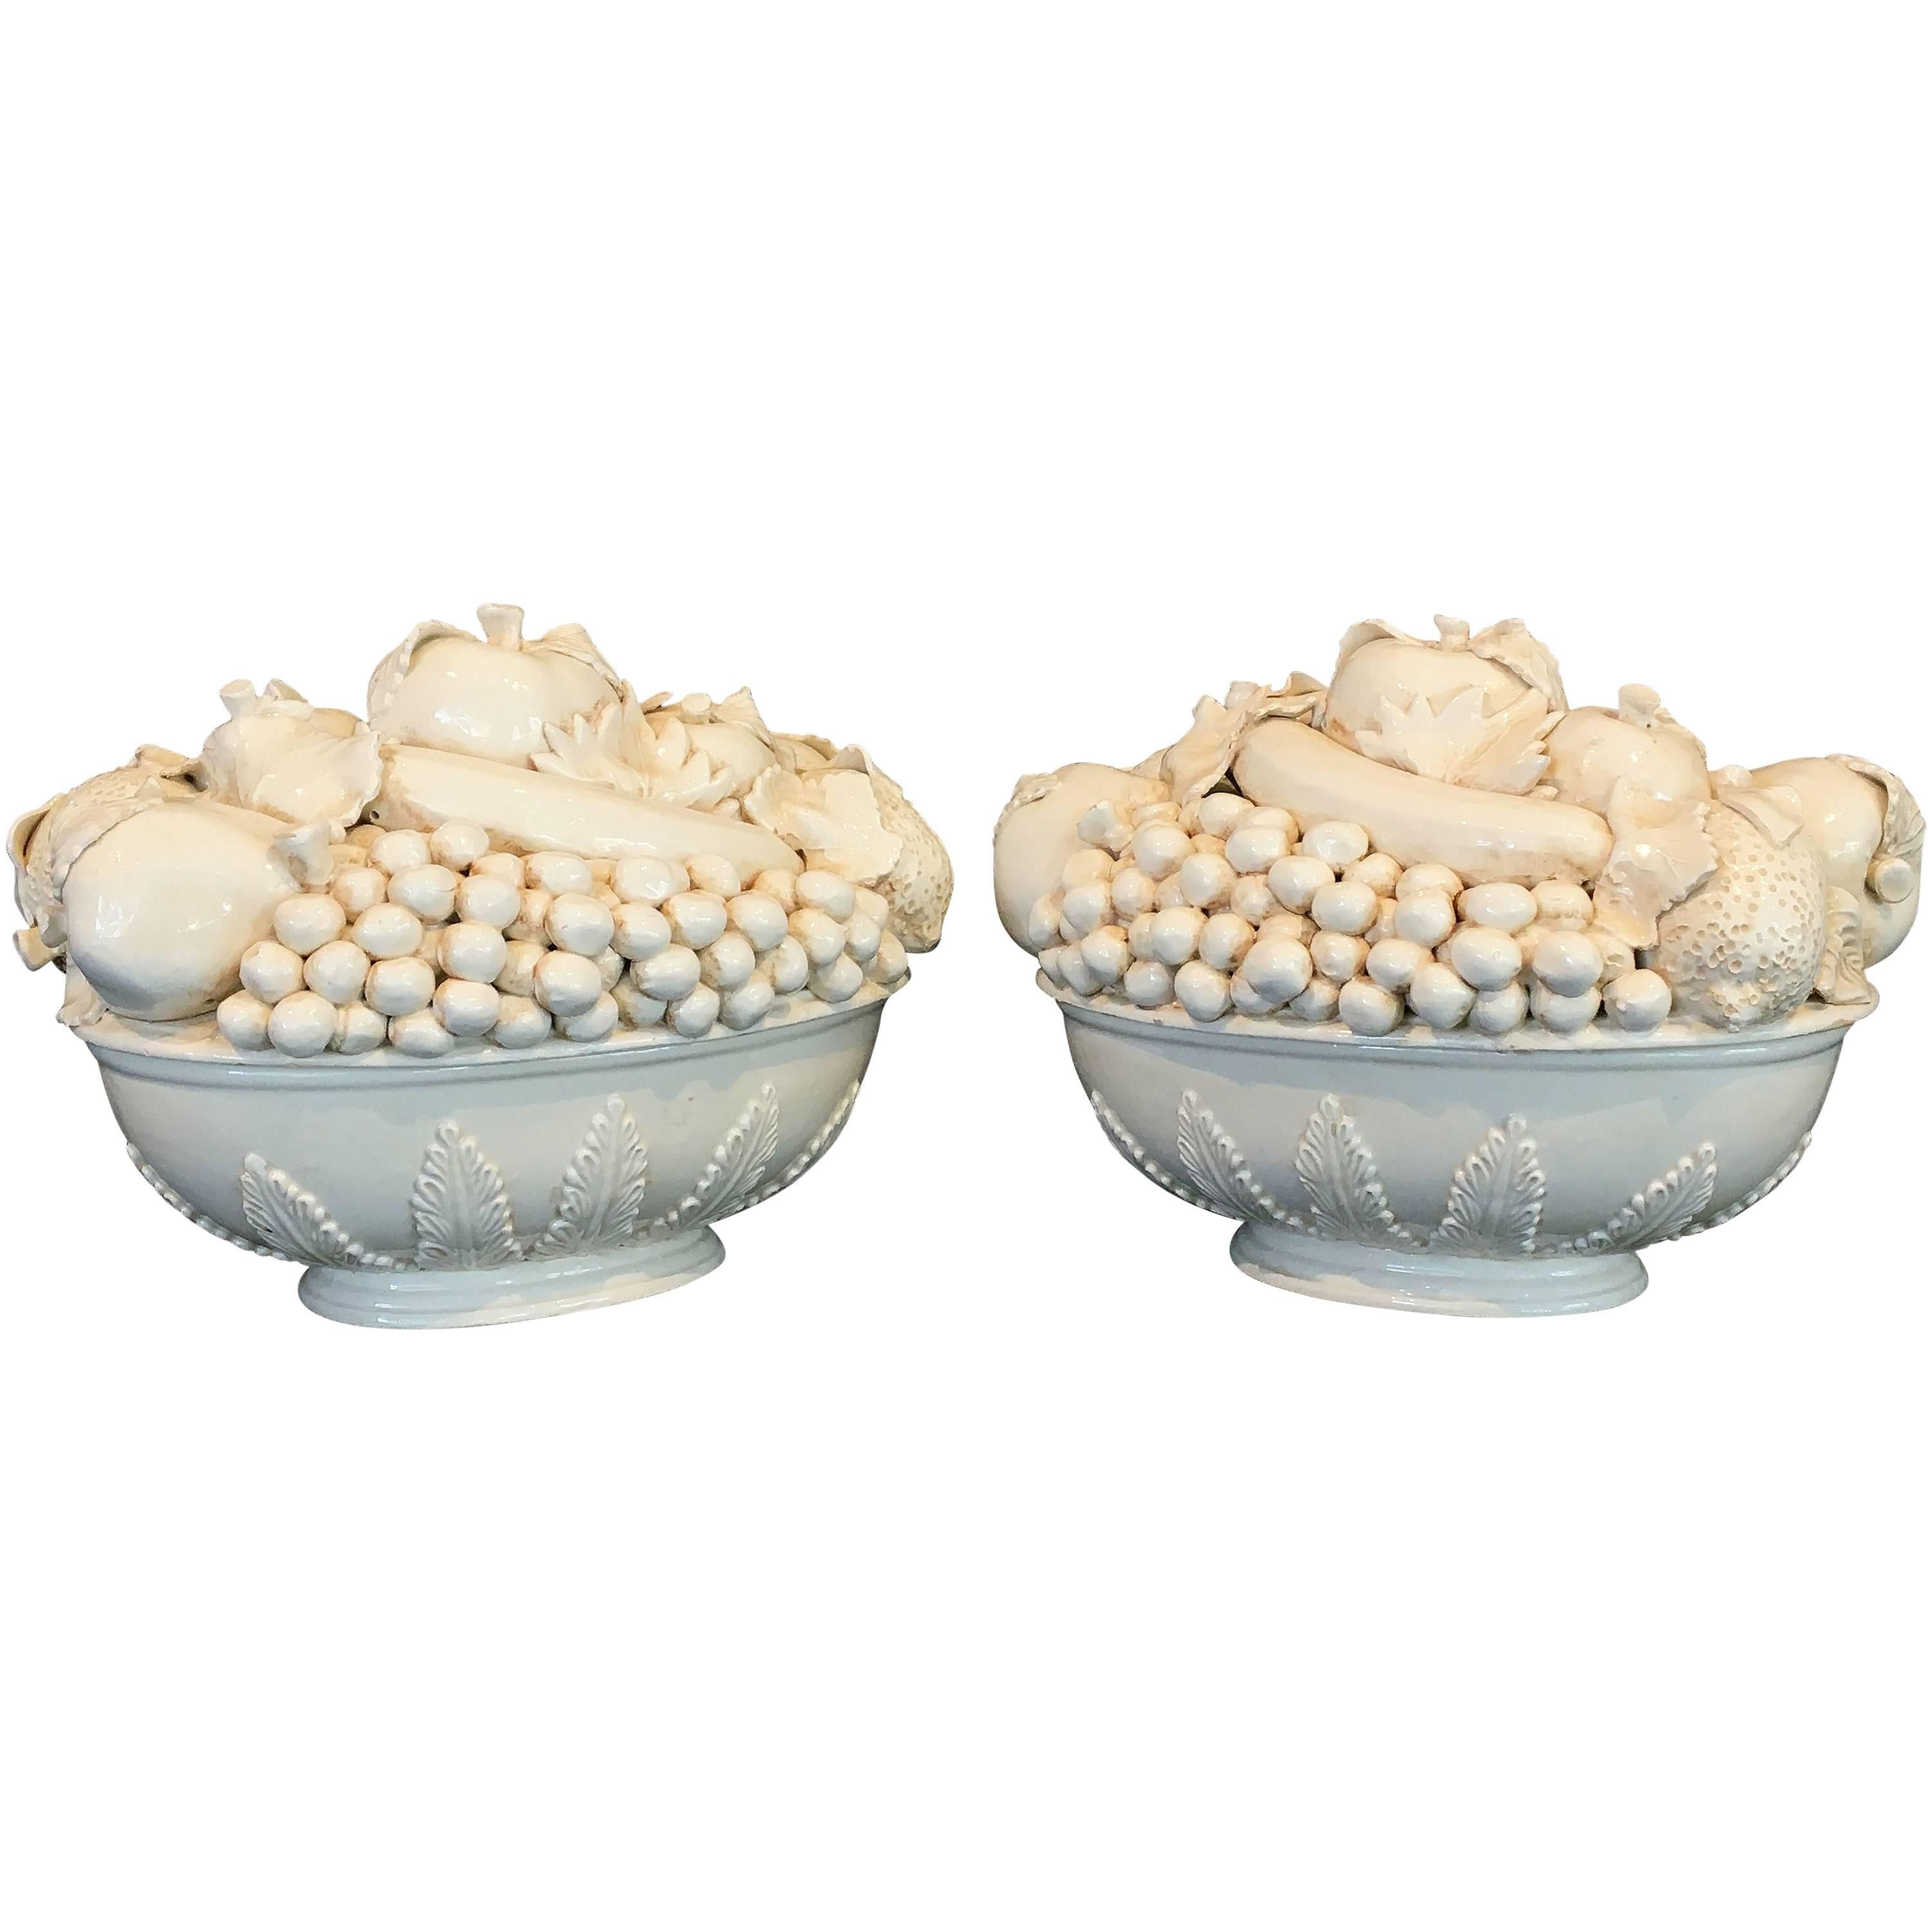 Pair of Italian Fruit Bowls with Lids